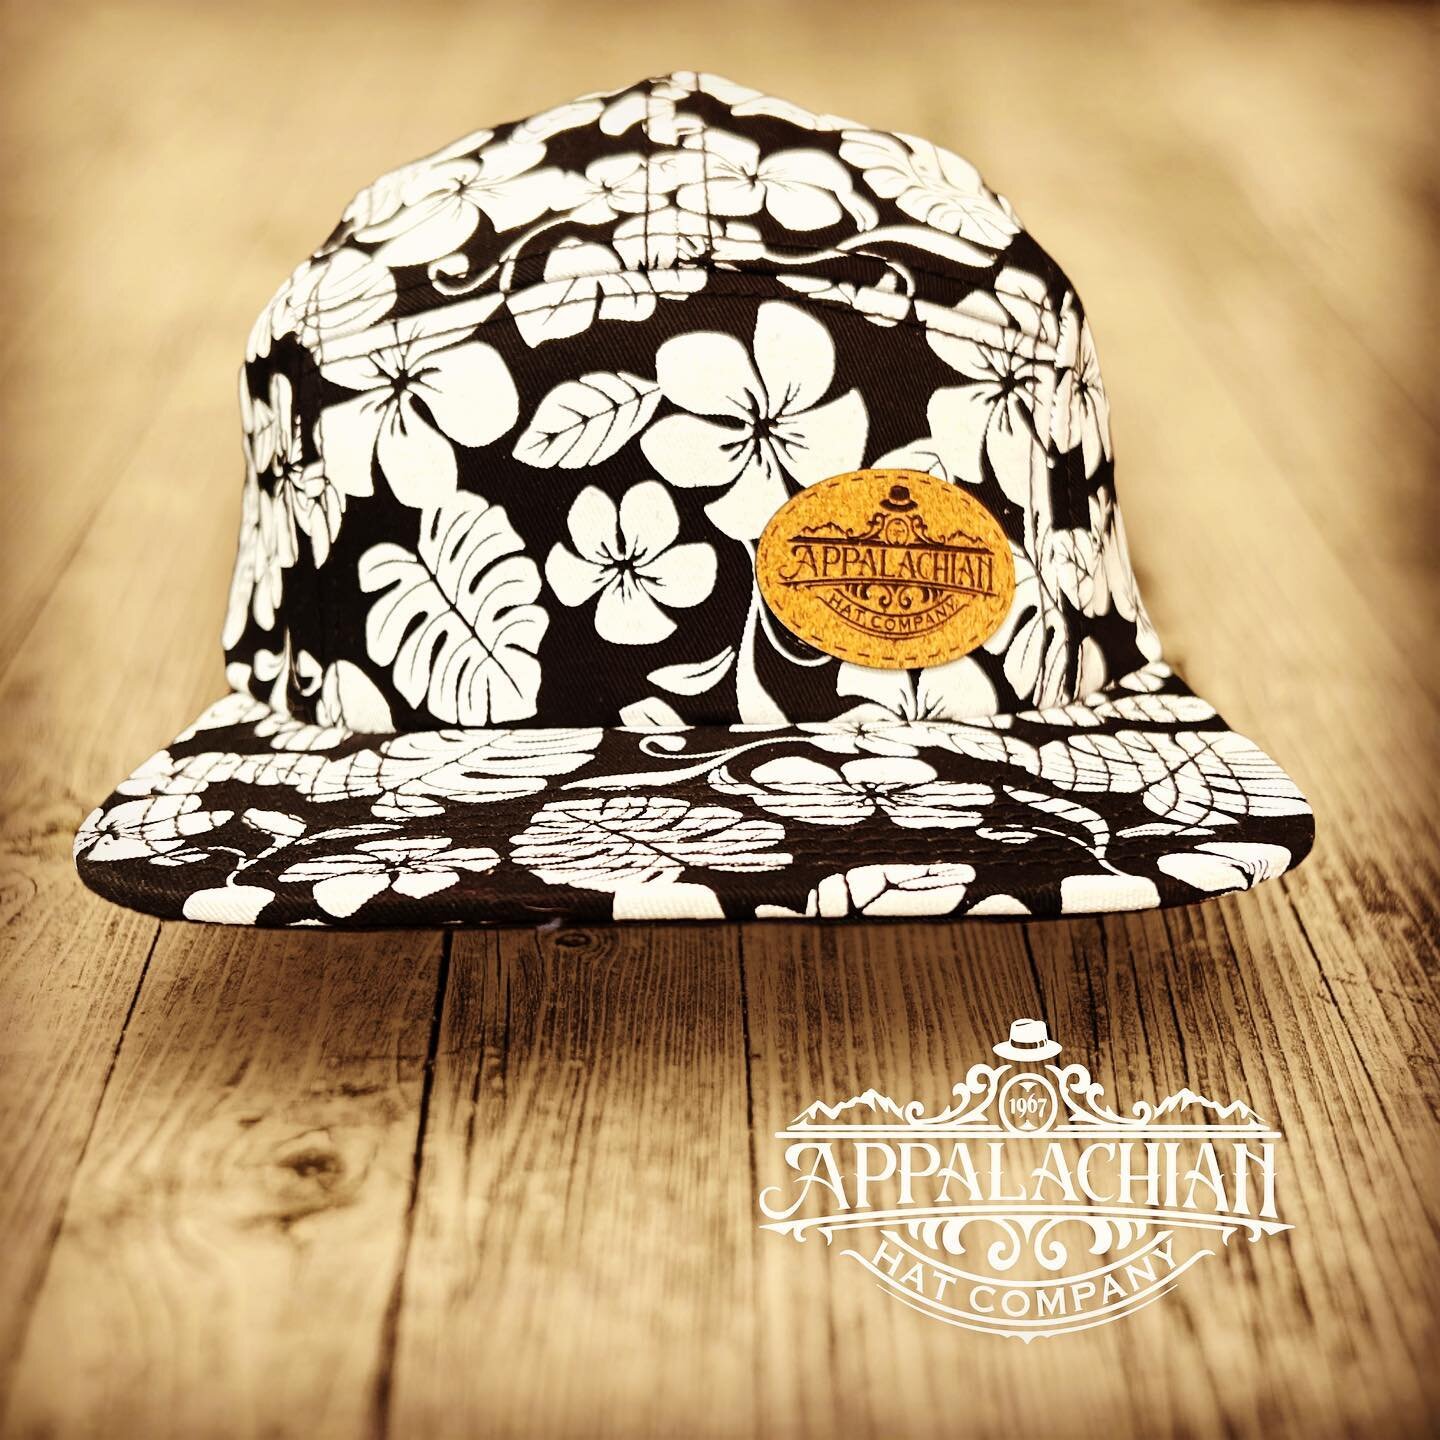 Just a little vintage style merch going in the shop tomorrow!  Come &lsquo;round and see the Jacktown Ramblers playin&rsquo; on our porch from 11-1:00 tomorrow! 10.22.22 #jacktownband #jacktownramblers #appalachianhatco #blackmountain #music #jazz #s